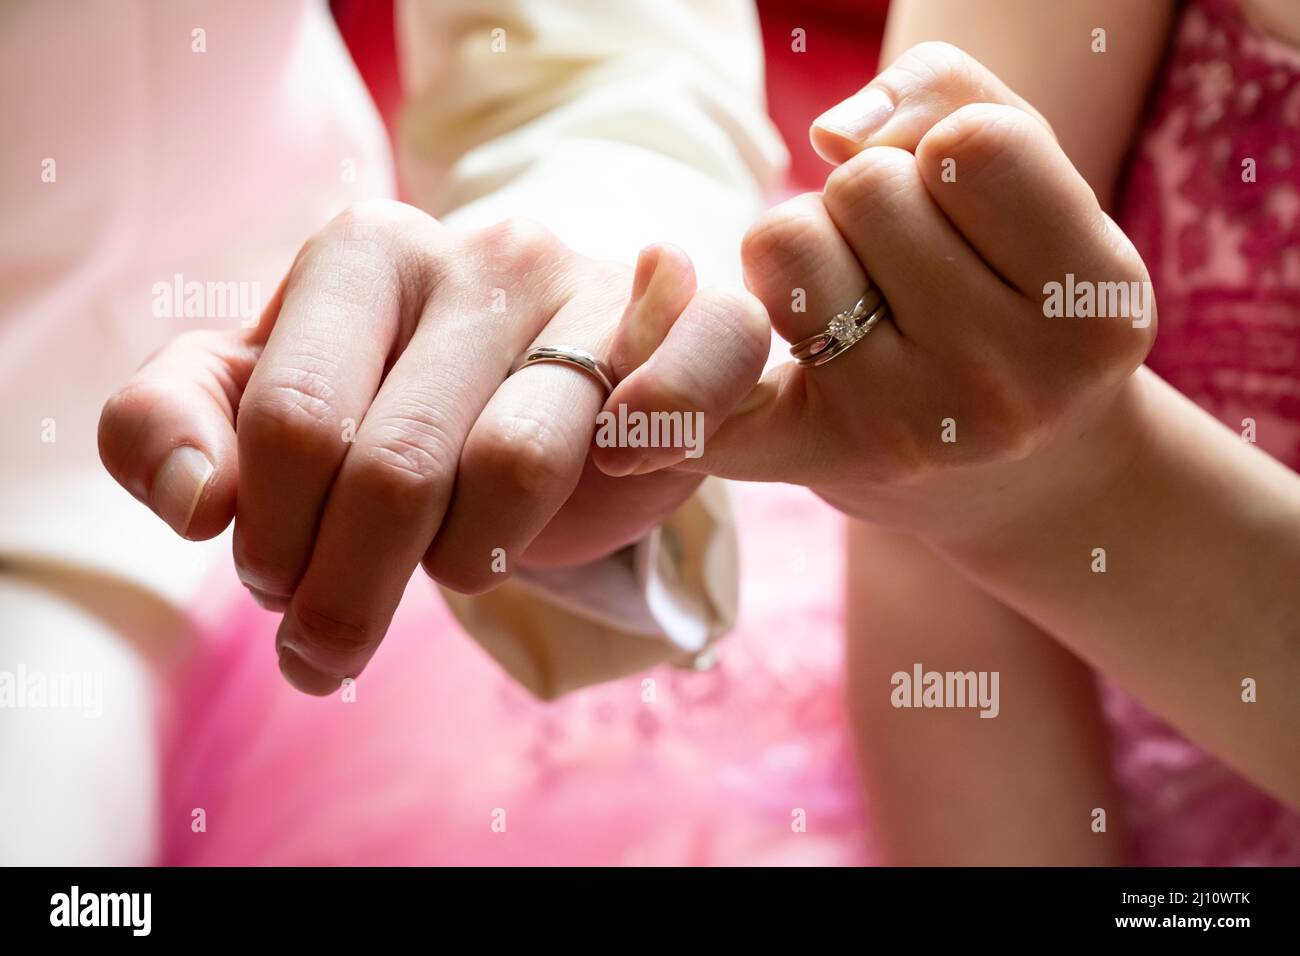 Left hands of men and women tied with a tight bond Stock Photo